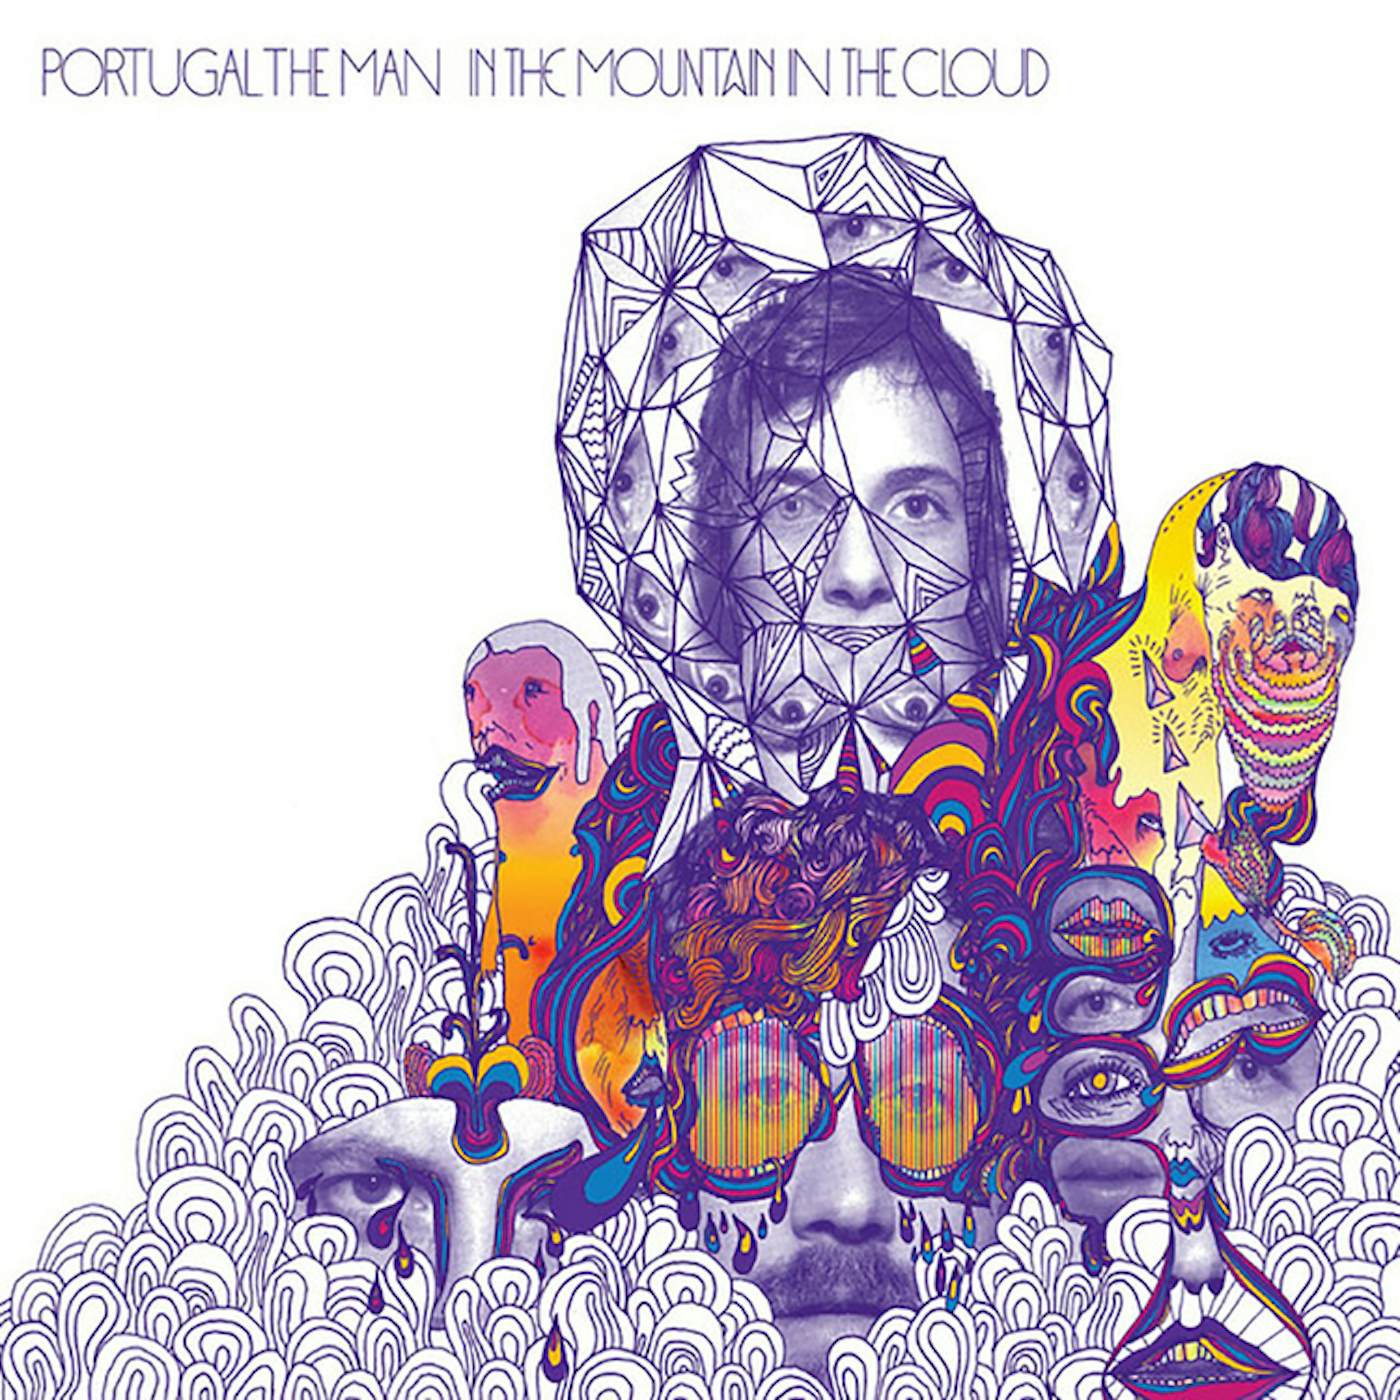 Portugal. The Man In The Mountain In The Cloud Vinyl Record